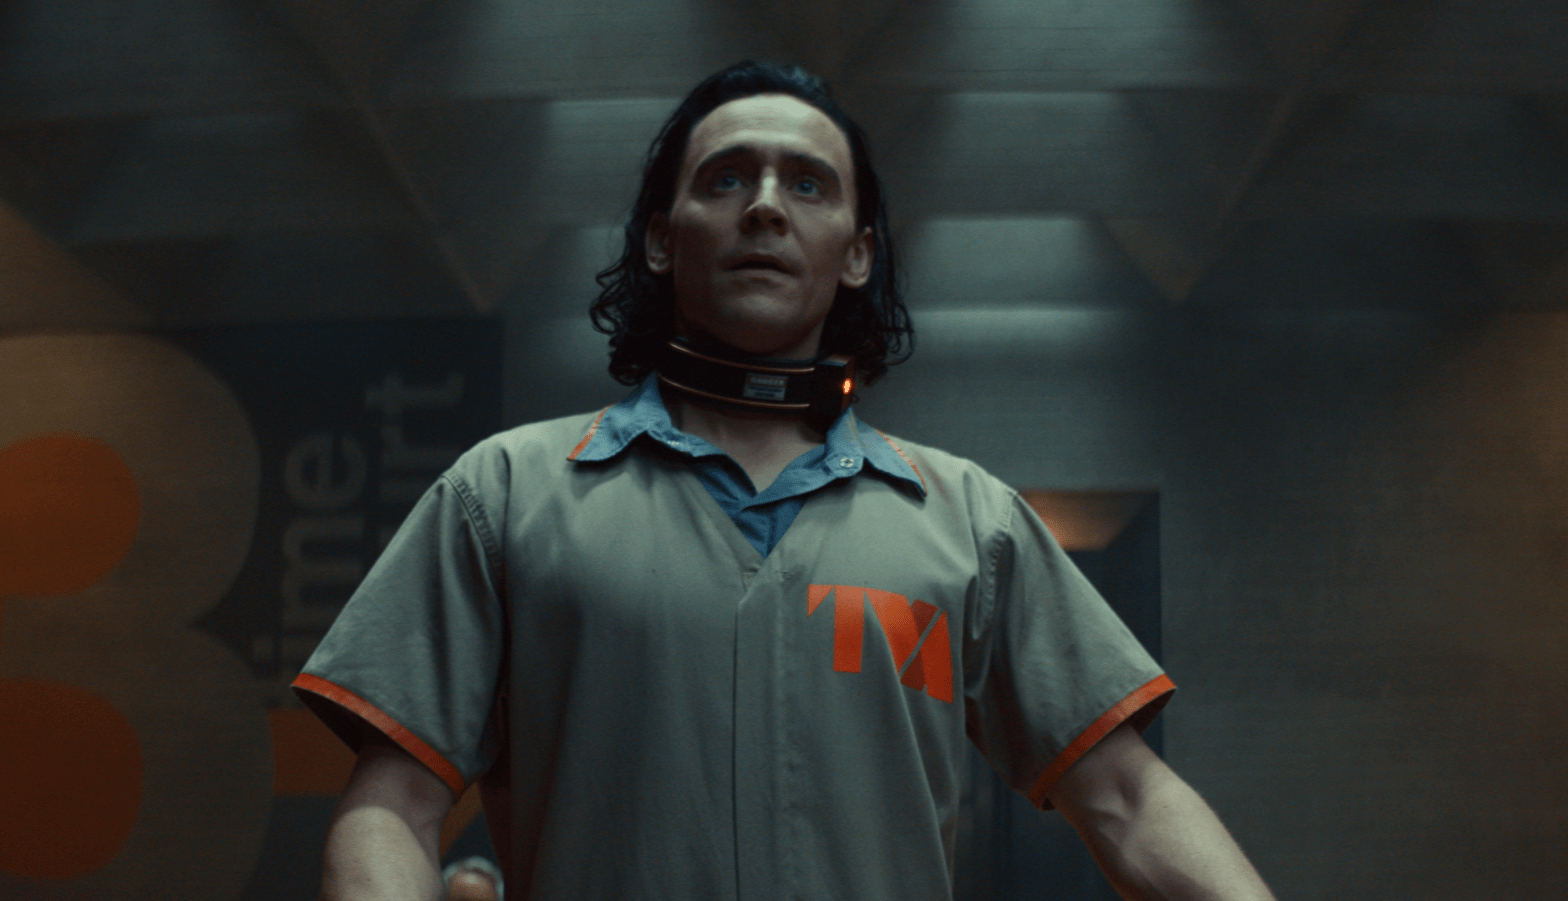 Loki's on trial — but who will be judge, jury, and executioner on his own story? (Image: Marvel Studios)